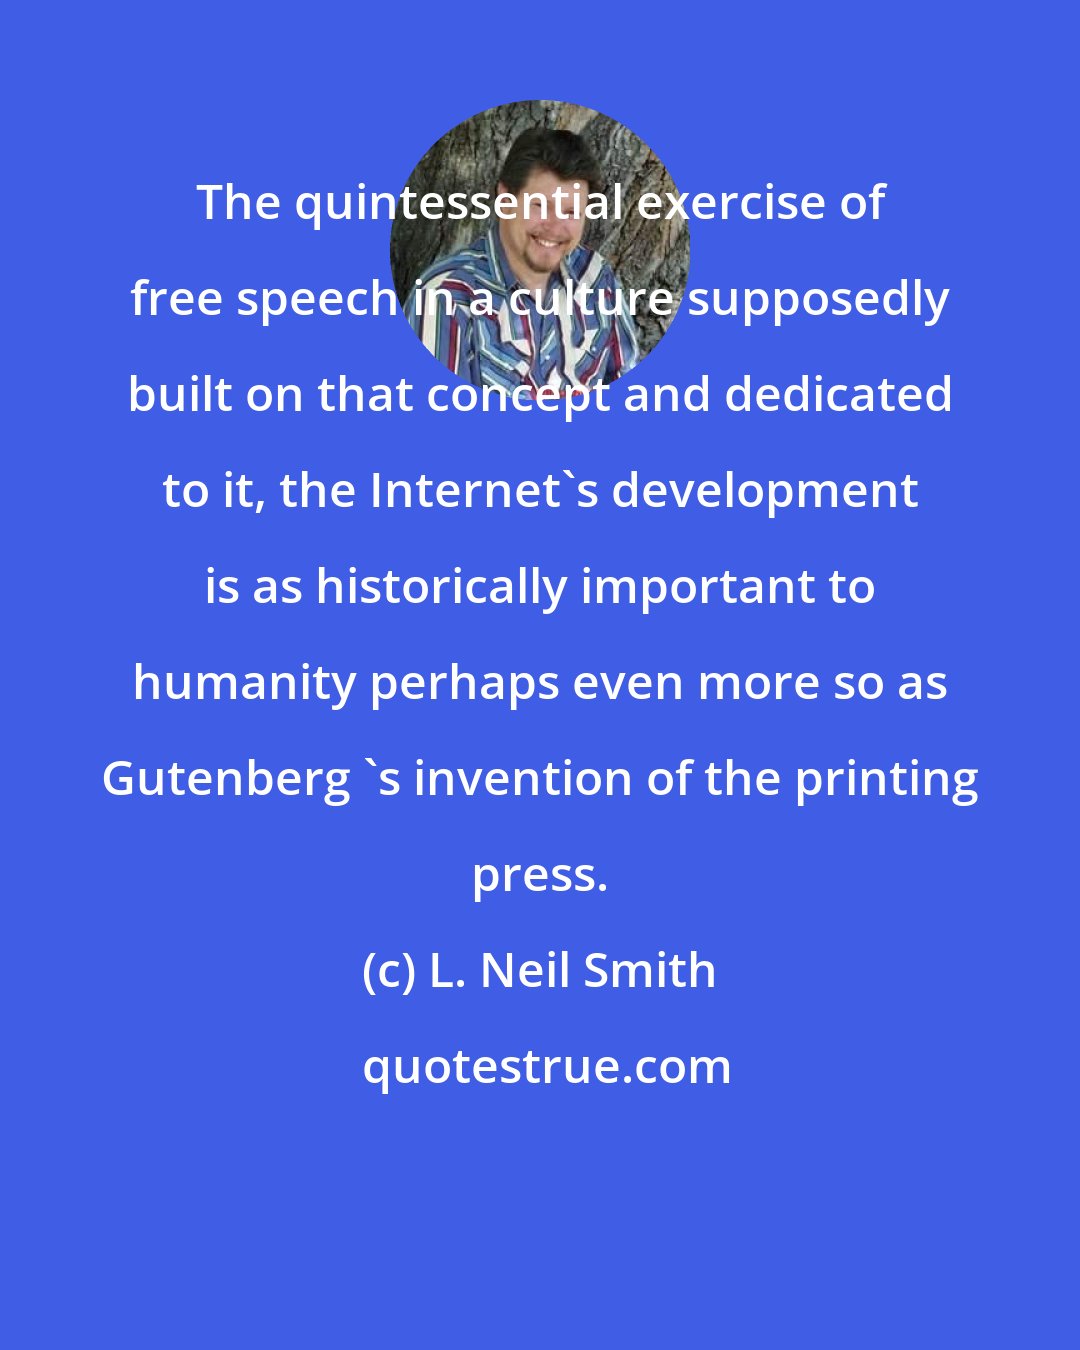 L. Neil Smith: The quintessential exercise of free speech in a culture supposedly built on that concept and dedicated to it, the Internet's development is as historically important to humanity perhaps even more so as Gutenberg 's invention of the printing press.